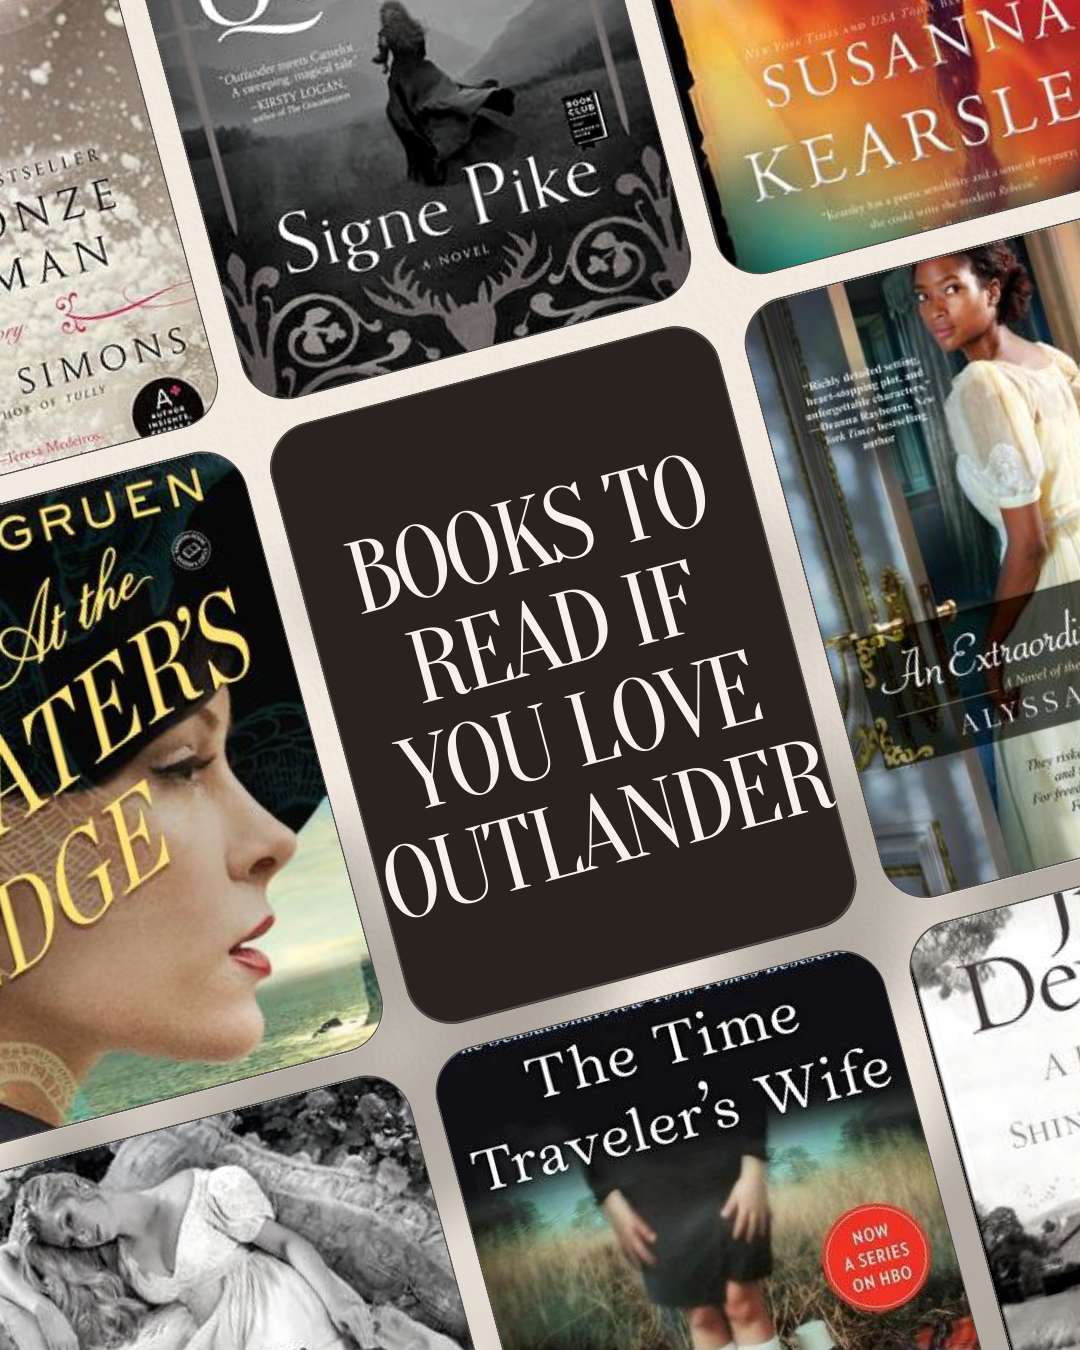 Books to Read If You Love Outlander